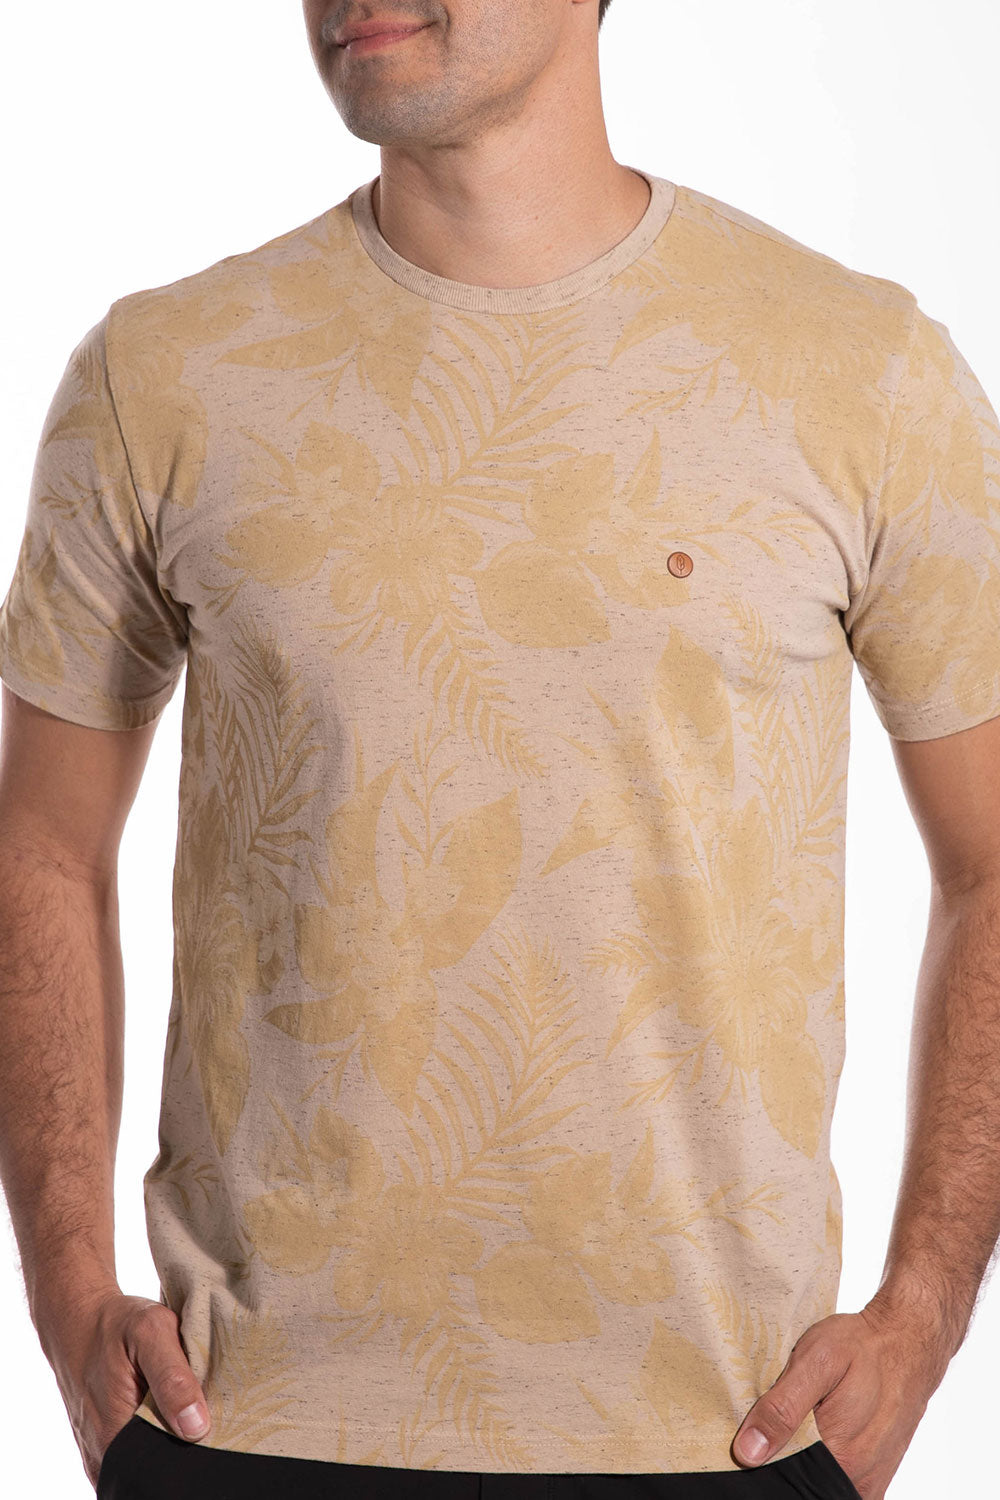 Tropical Chill Tee